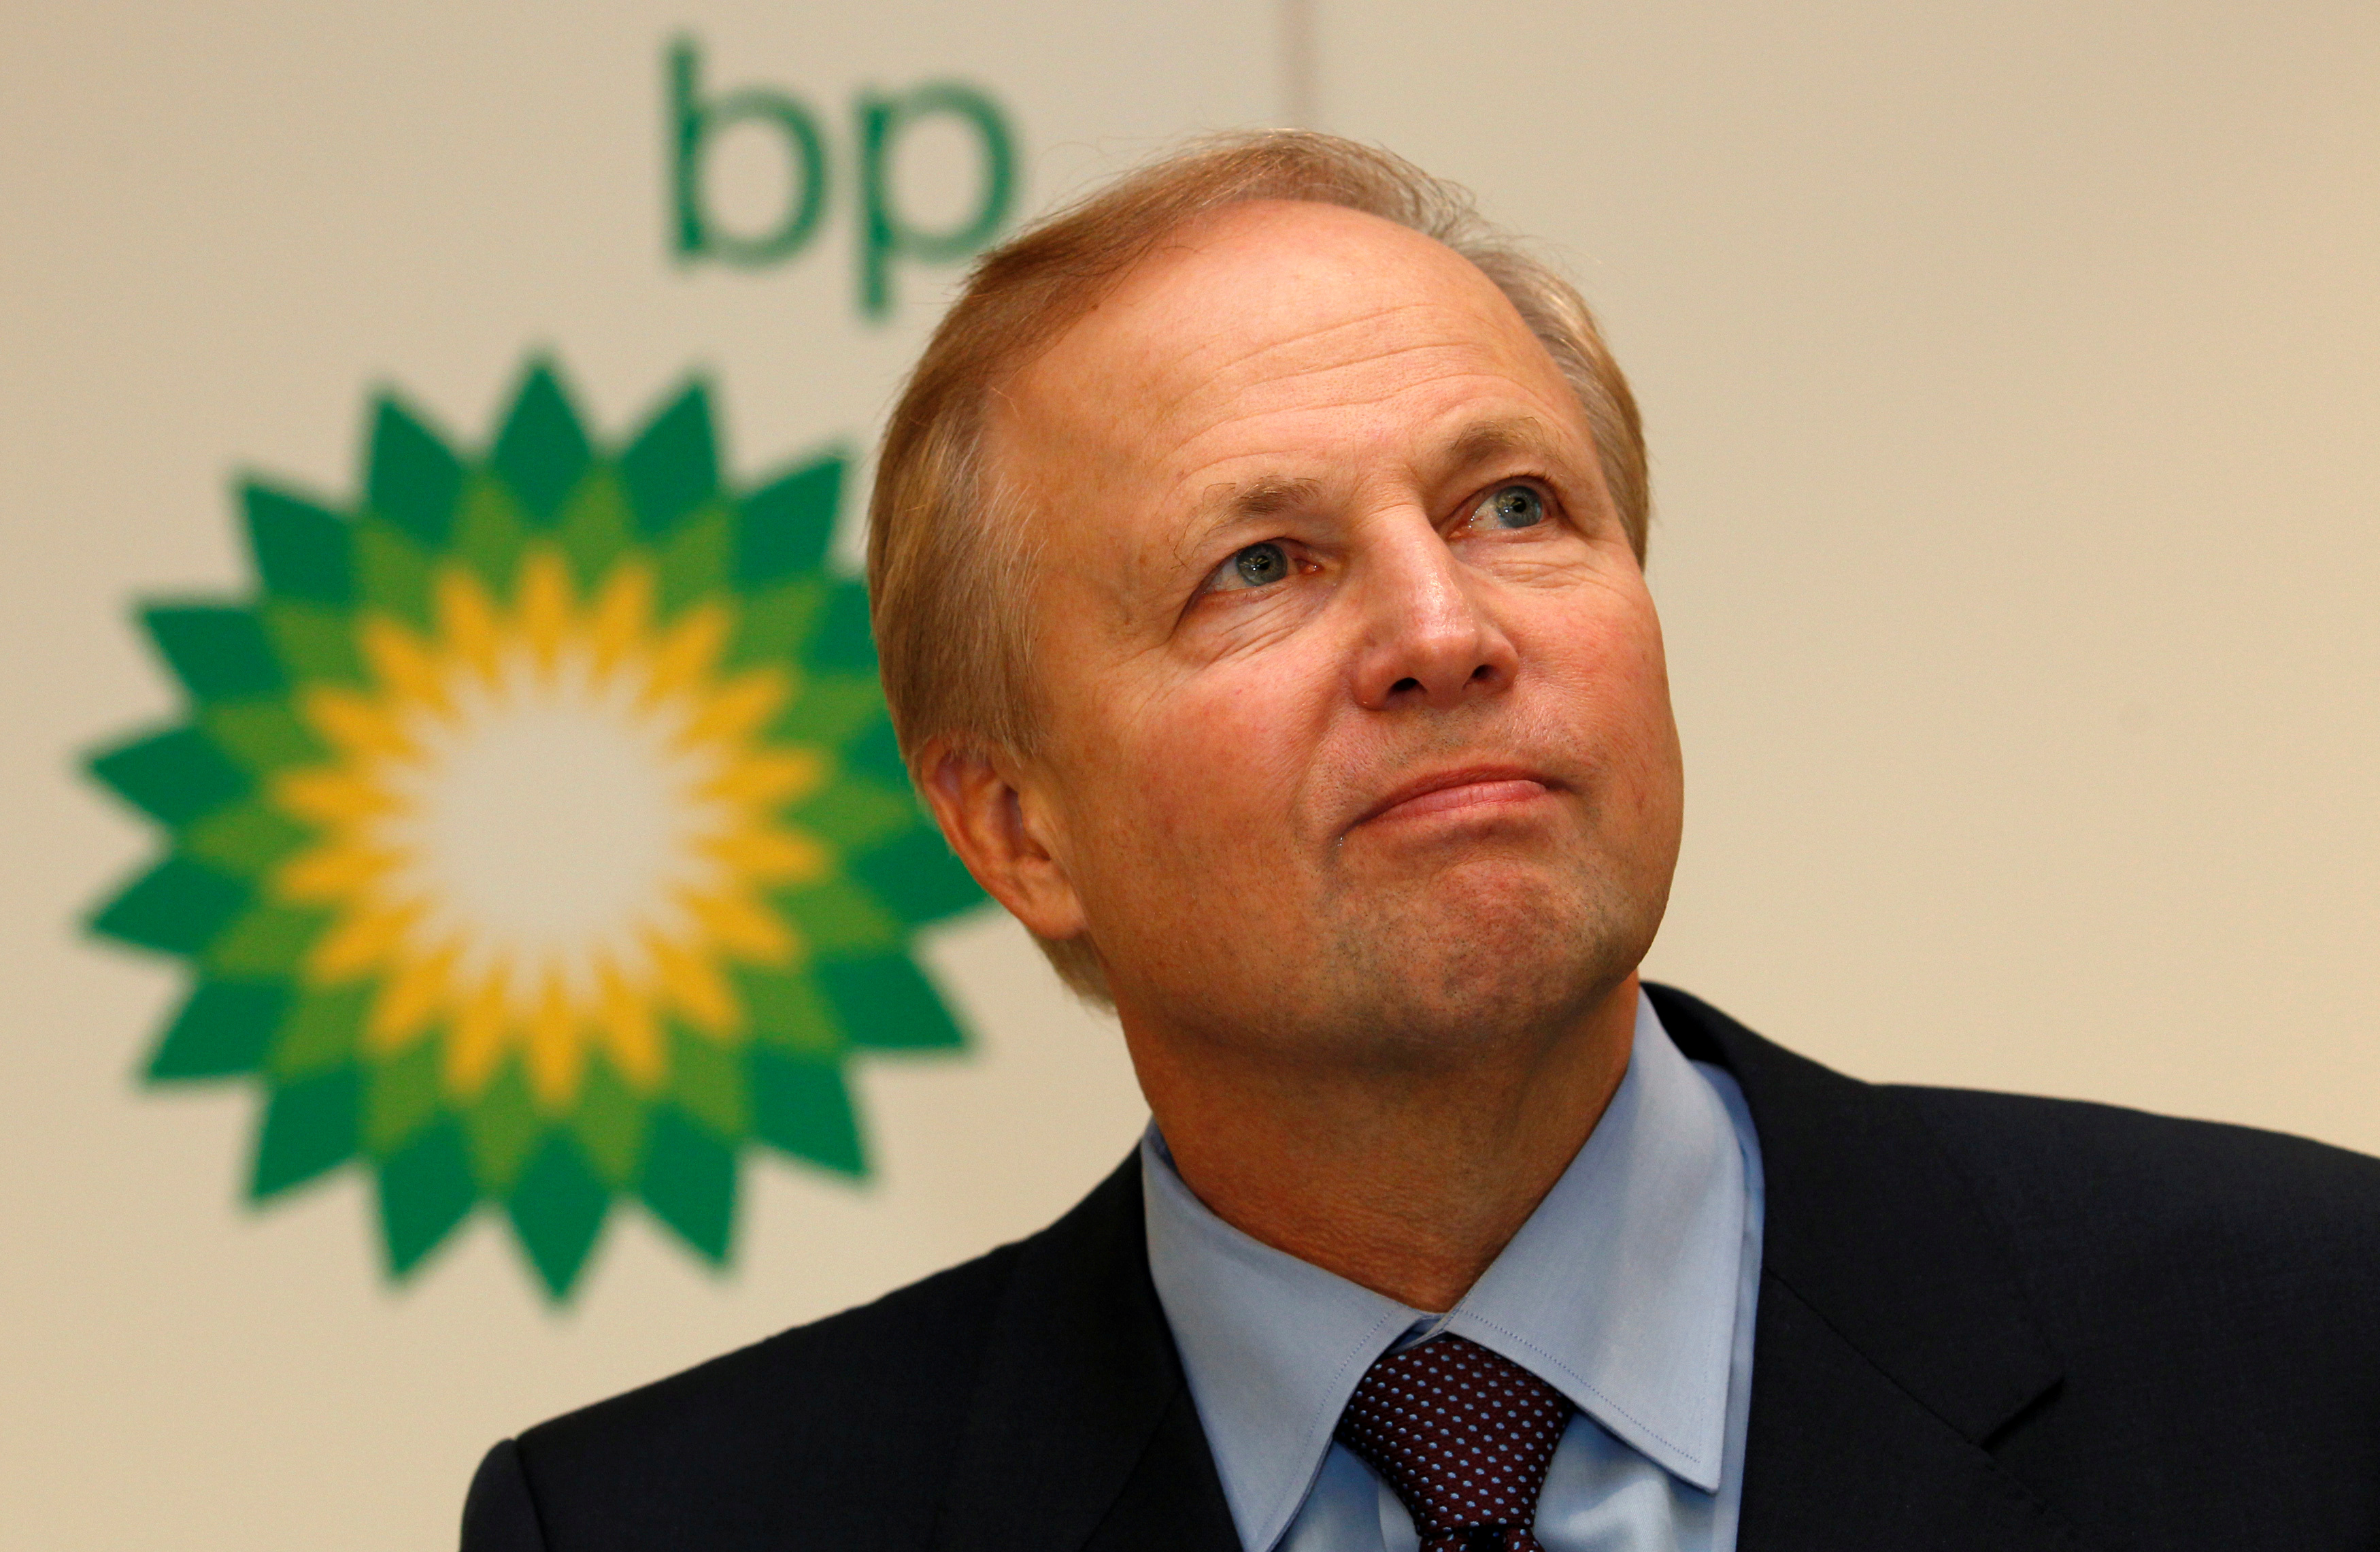 BP's Chief Executive Bob Dudley speaks to the media after year-end results were announced at the energy company's headquarters in London February 1, 2011. REUTERS/Suzanne Plunkett